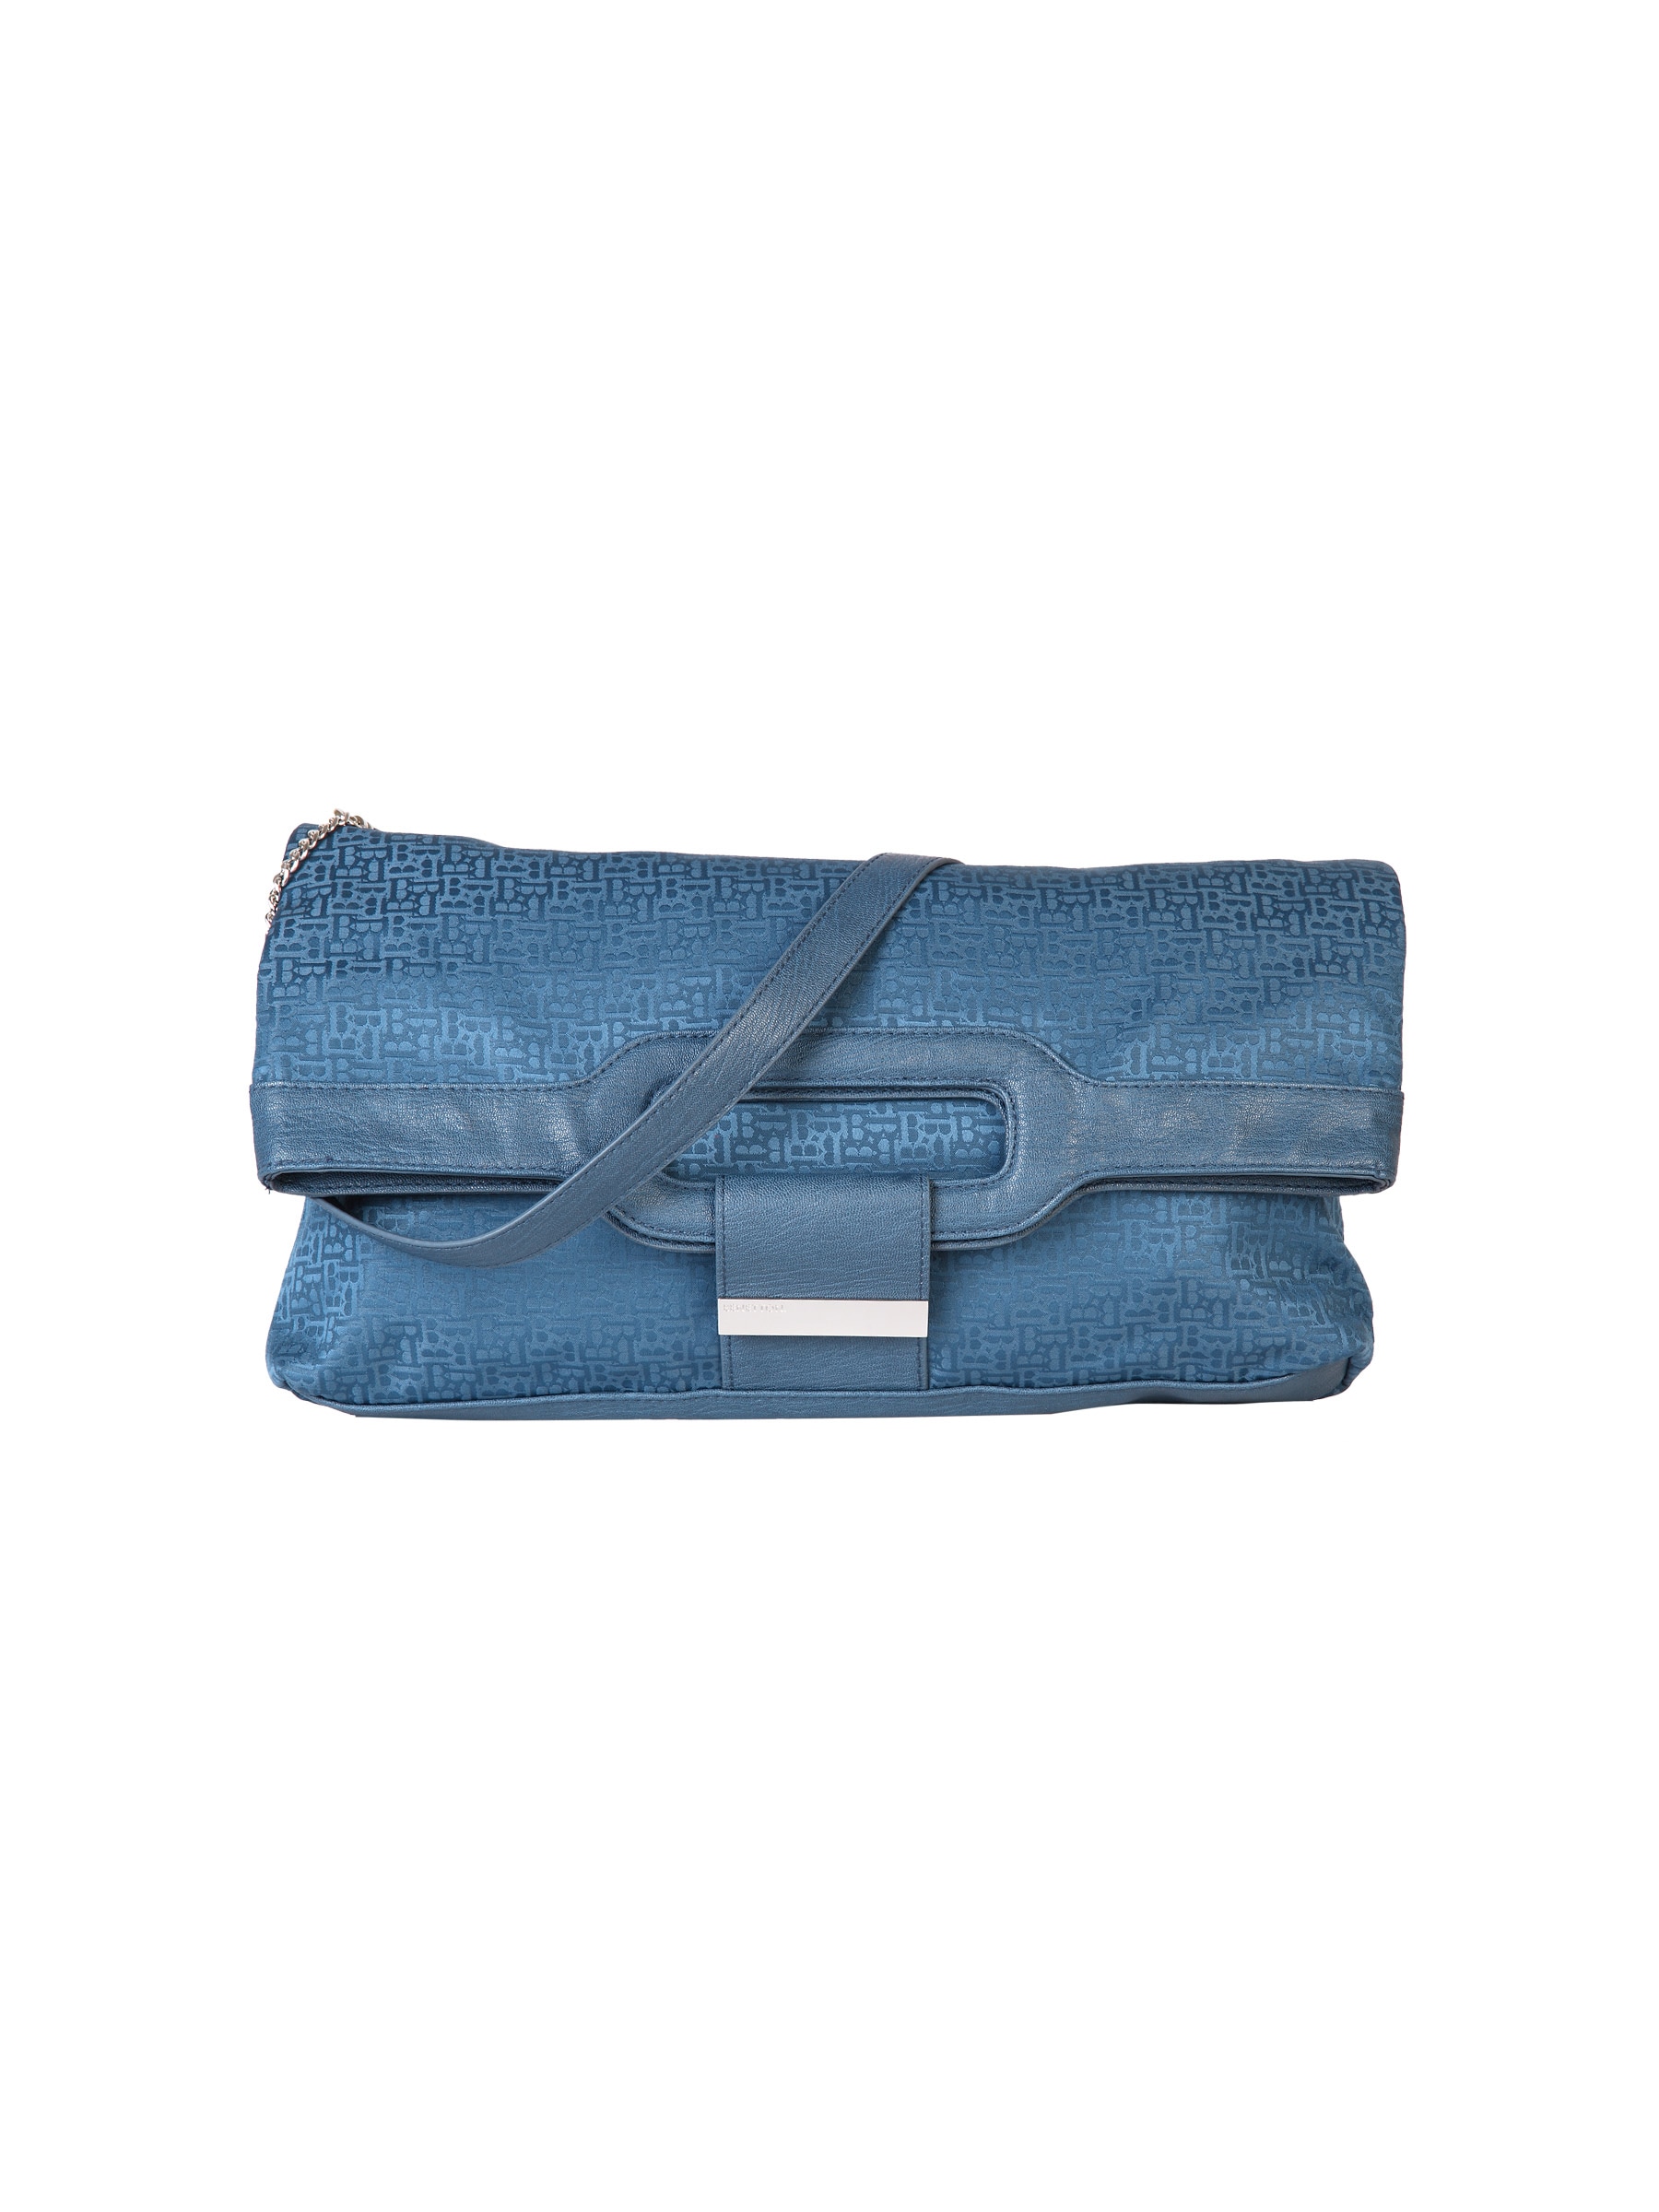 United Colors of Benetton Blue Solid Sling Bag